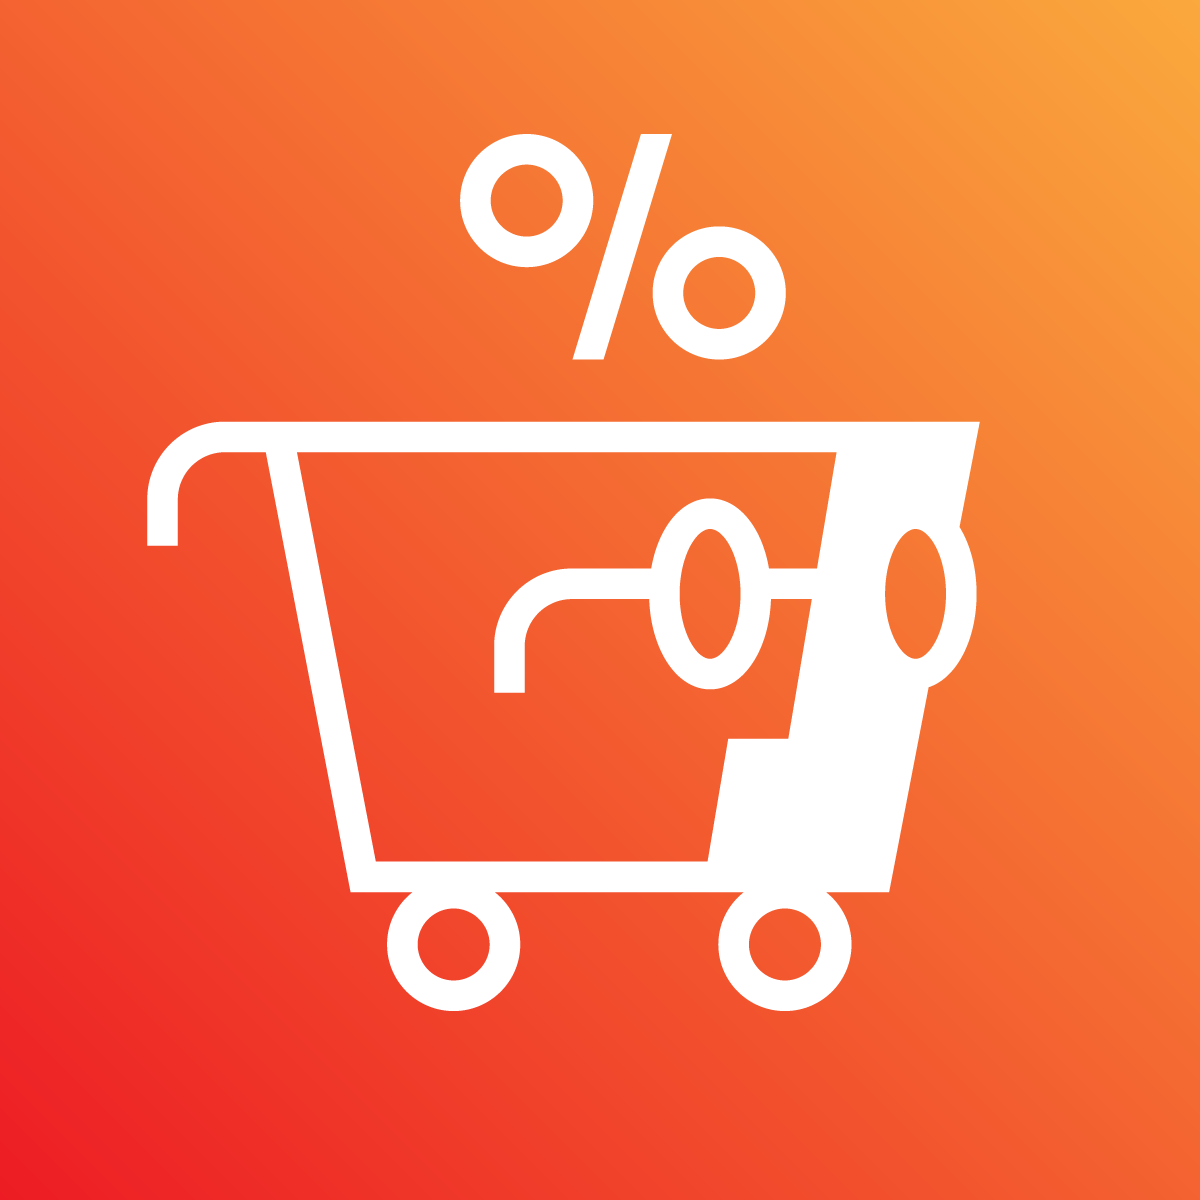 Dr. Discount On Cart Shopify App